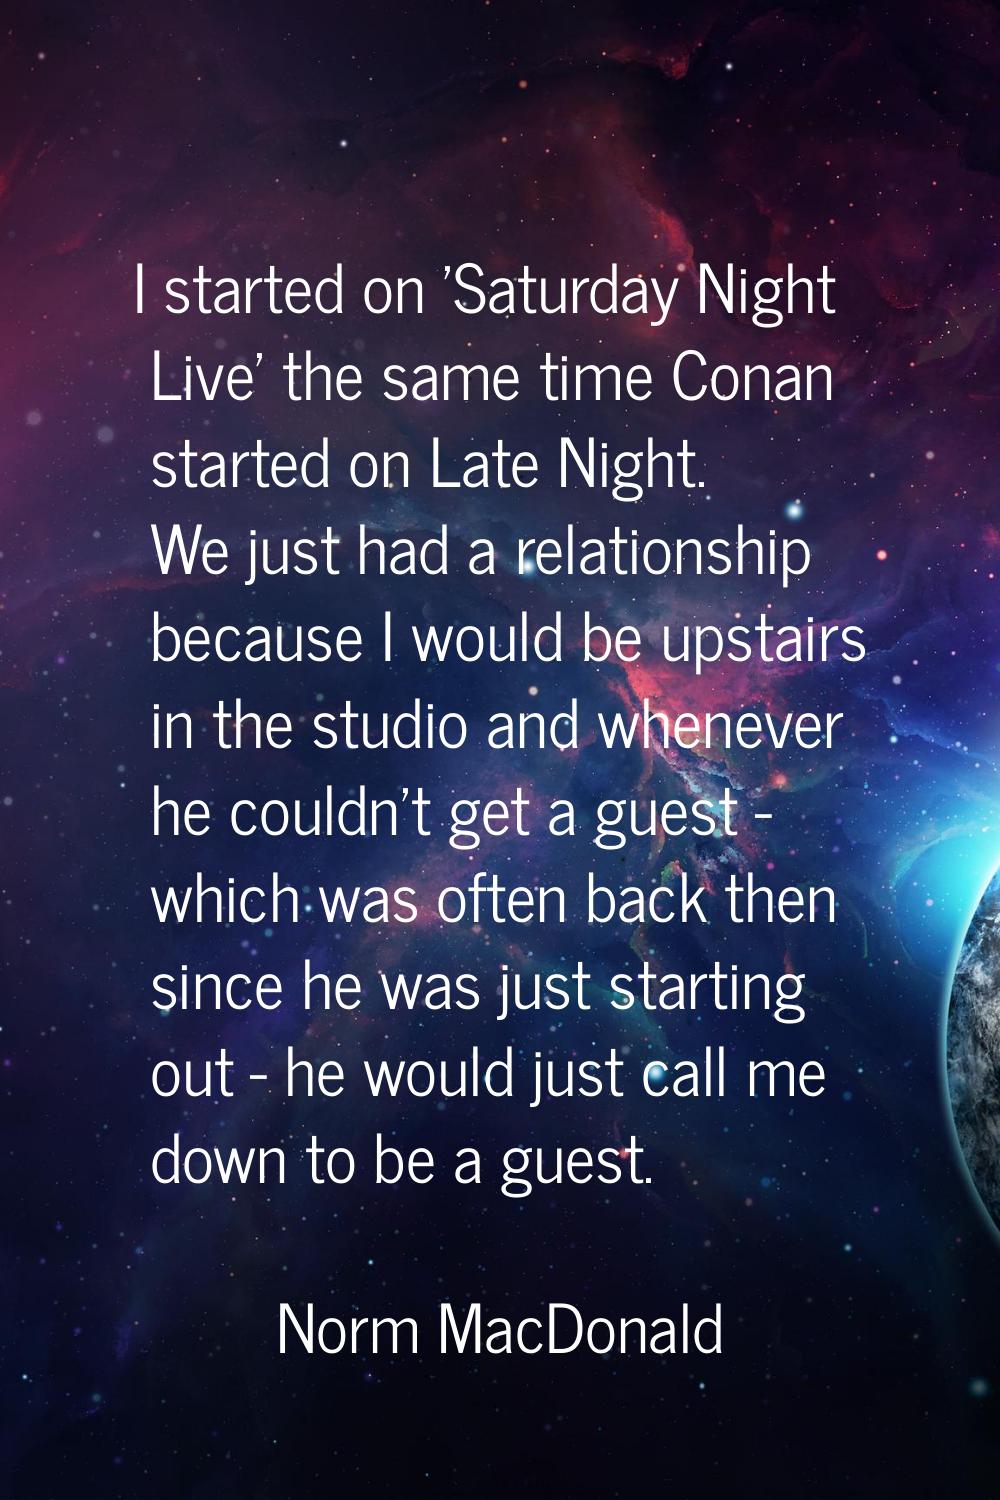 I started on 'Saturday Night Live' the same time Conan started on Late Night. We just had a relatio